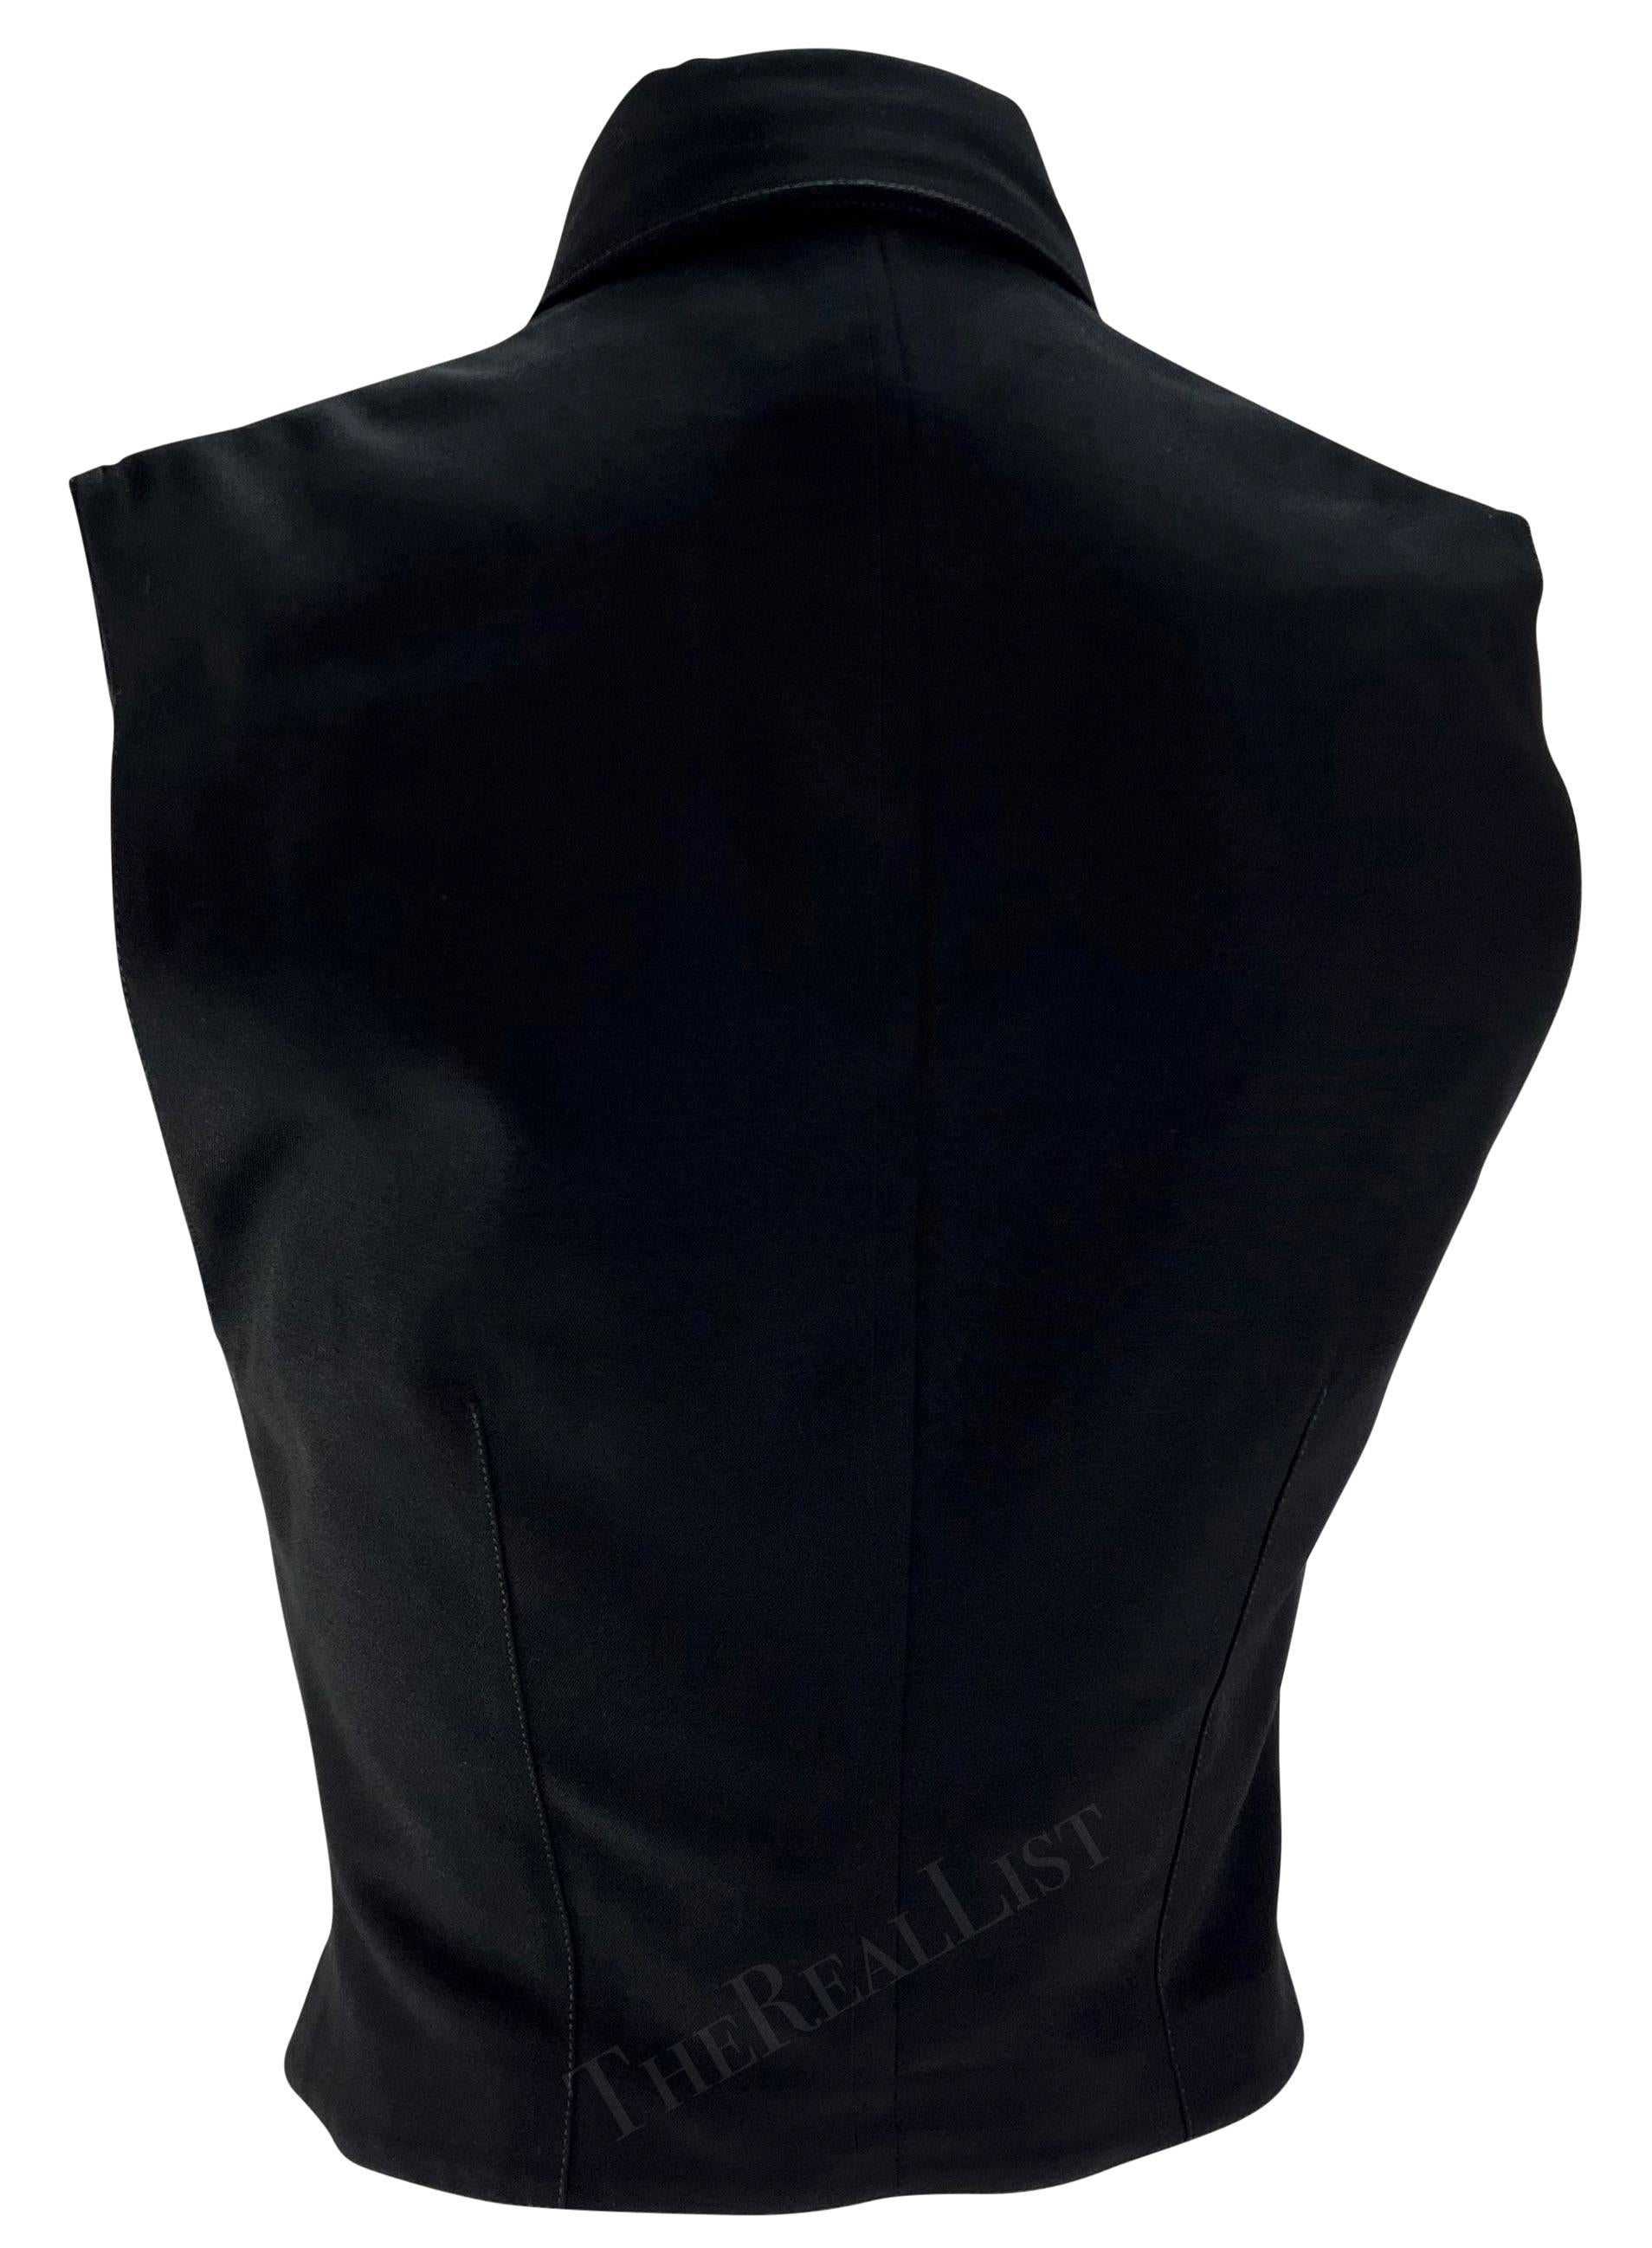 F/W 1992 Gianni Versace 'Miss S&M' Black Metal Accent Cropped Vest 2